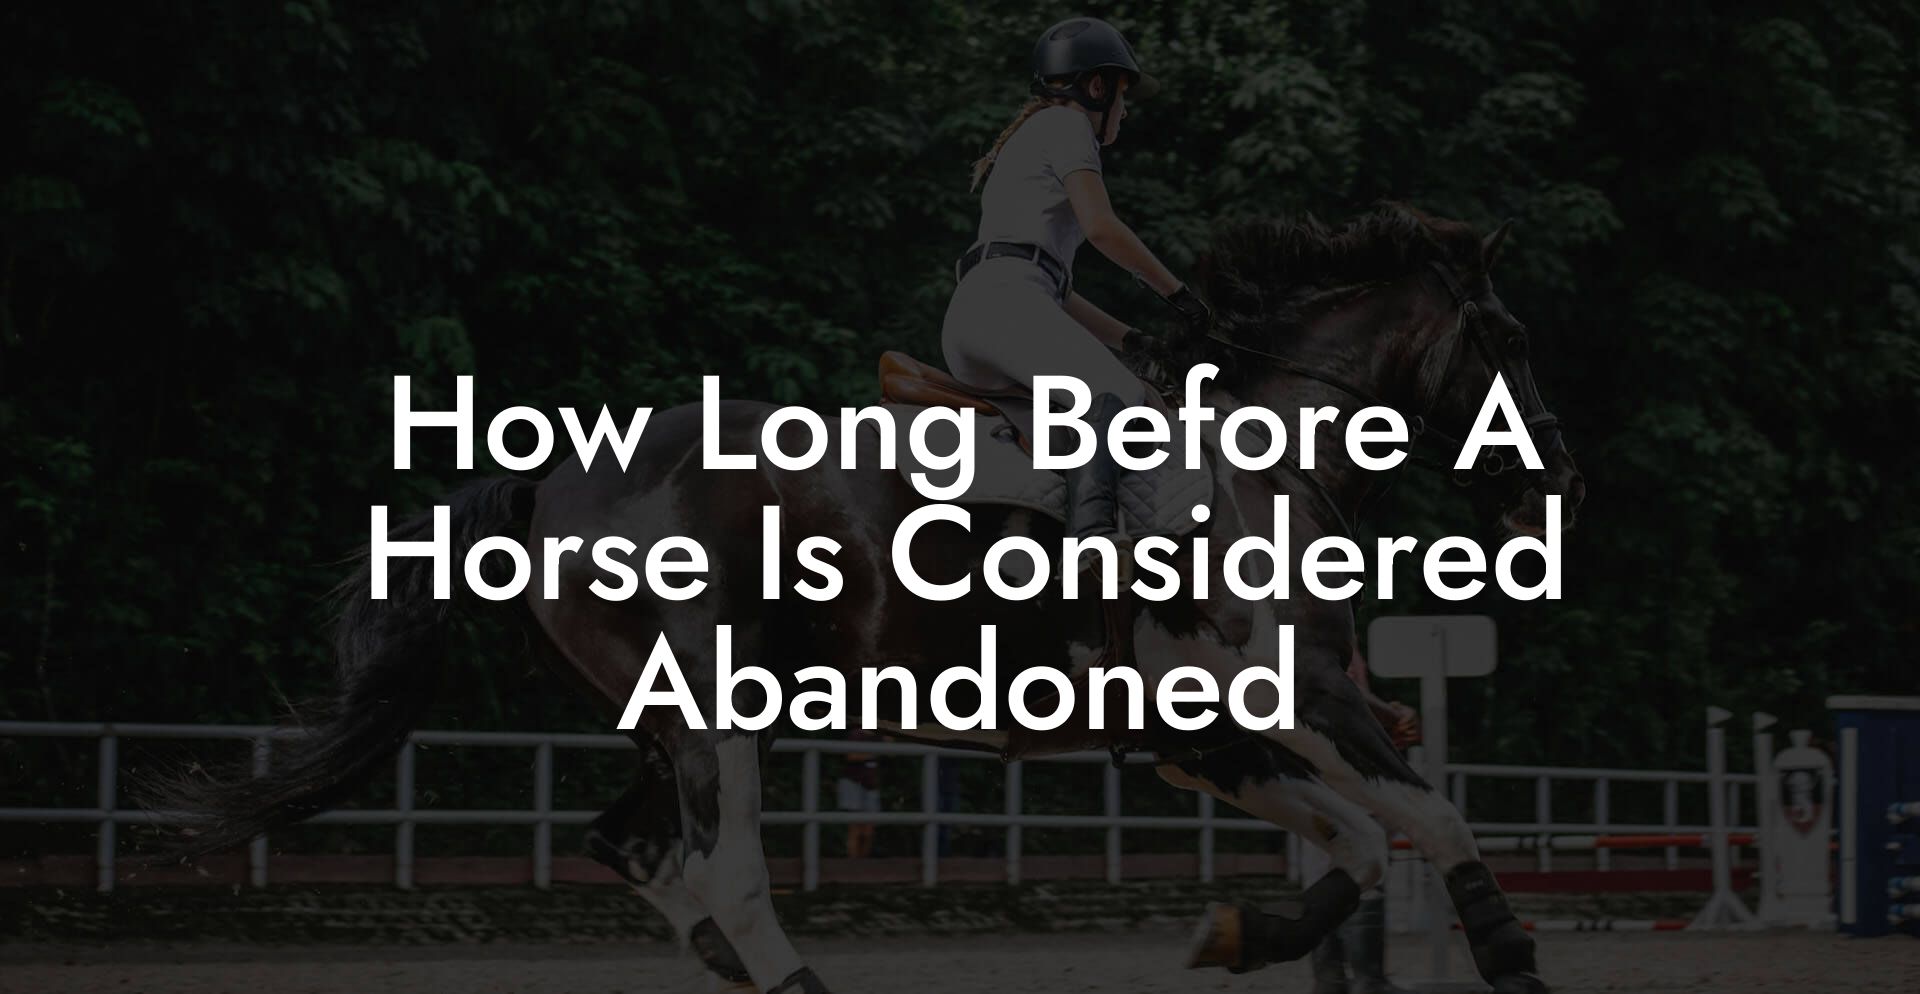 How Long Before A Horse Is Considered Abandoned